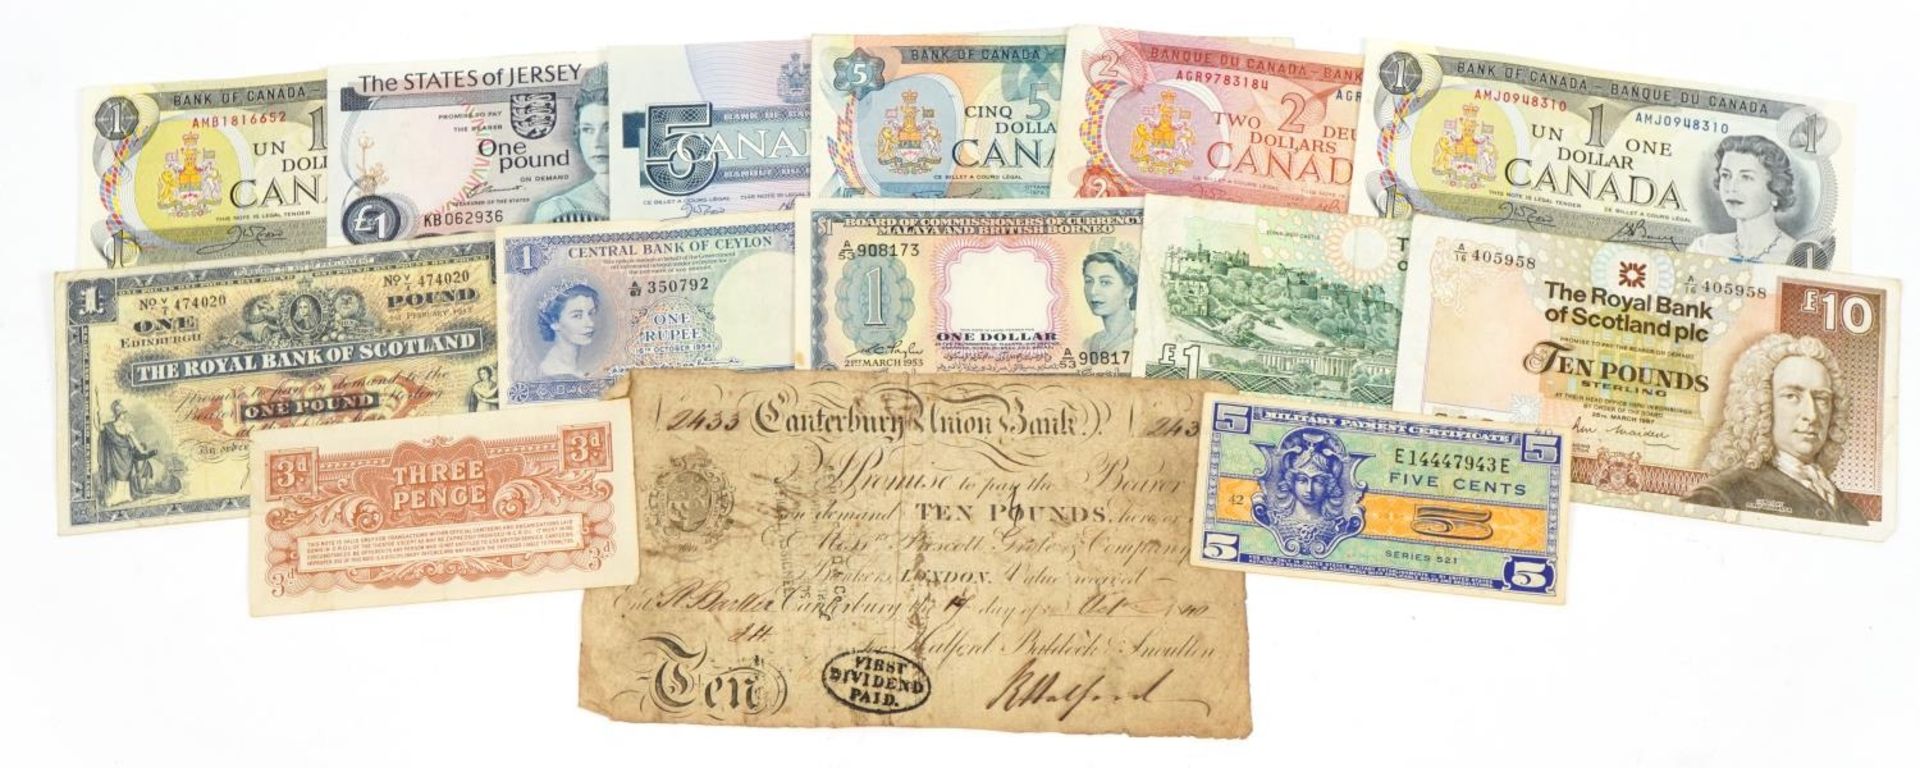 Mid 19th century and later English and Scottish banknotes including Canterbury Union Bank ten pounds